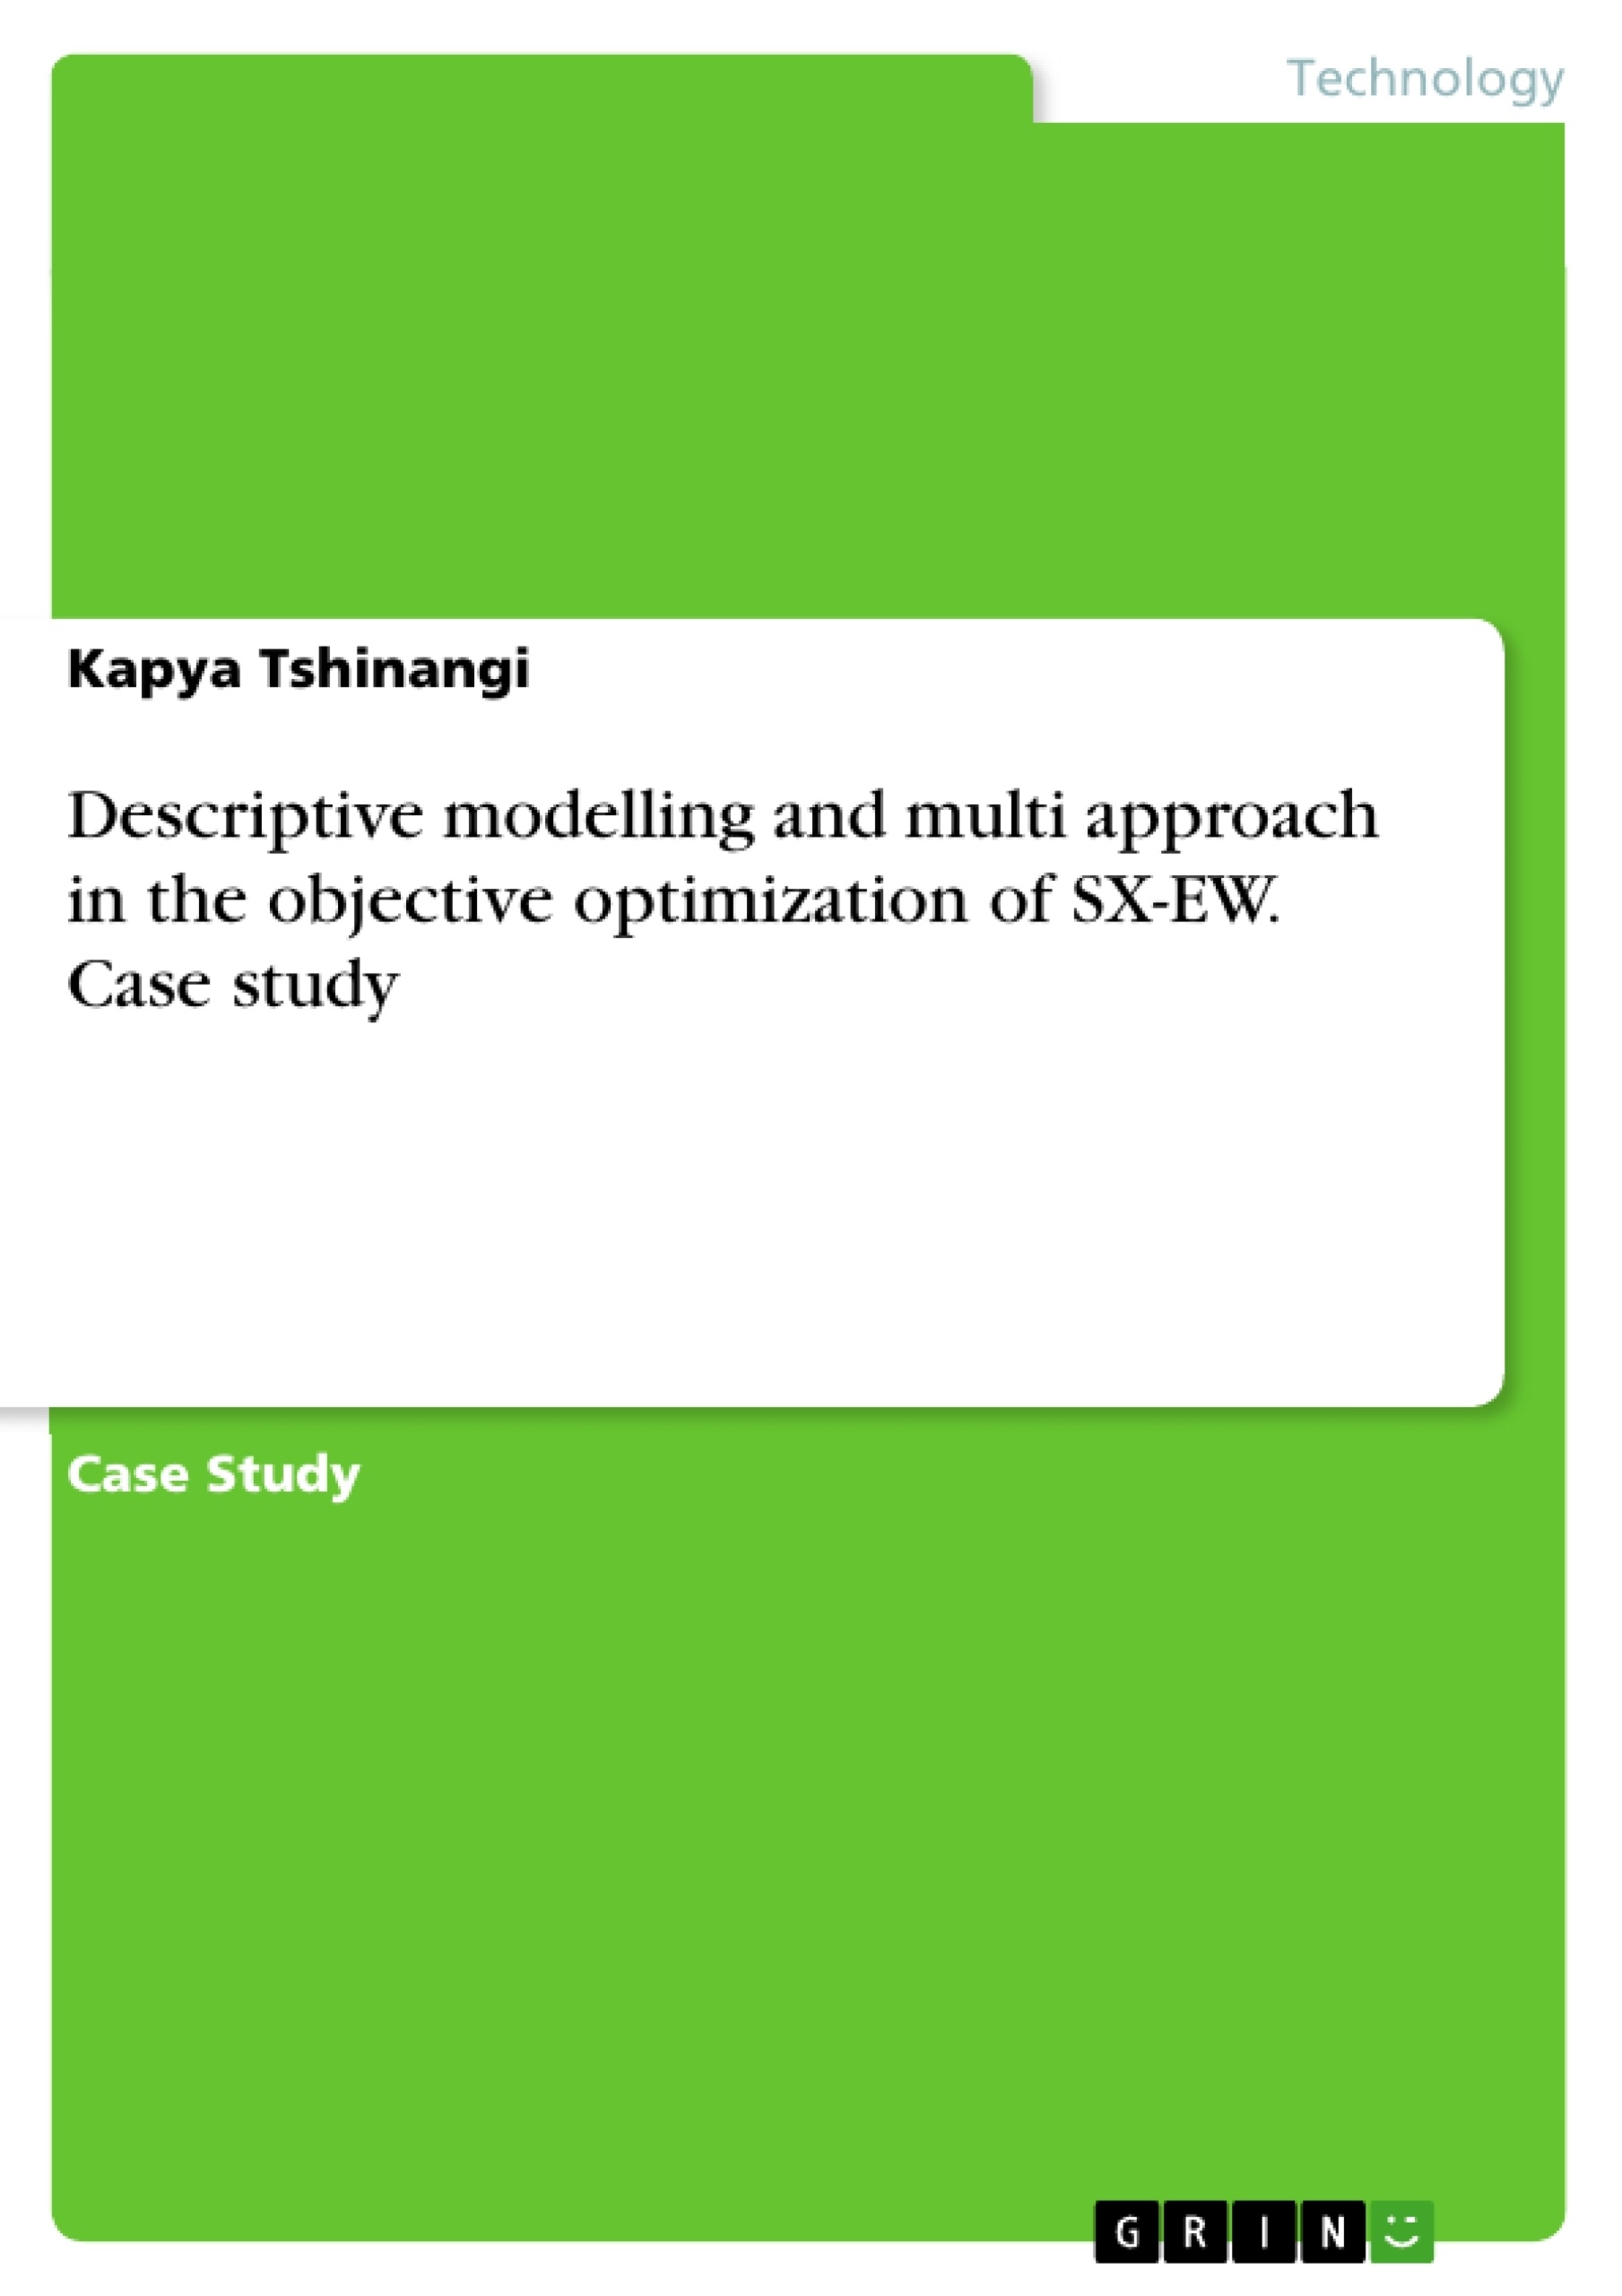 Title: Descriptive modelling  and  multi approach in the objective optimization  of SX-EW. Case study